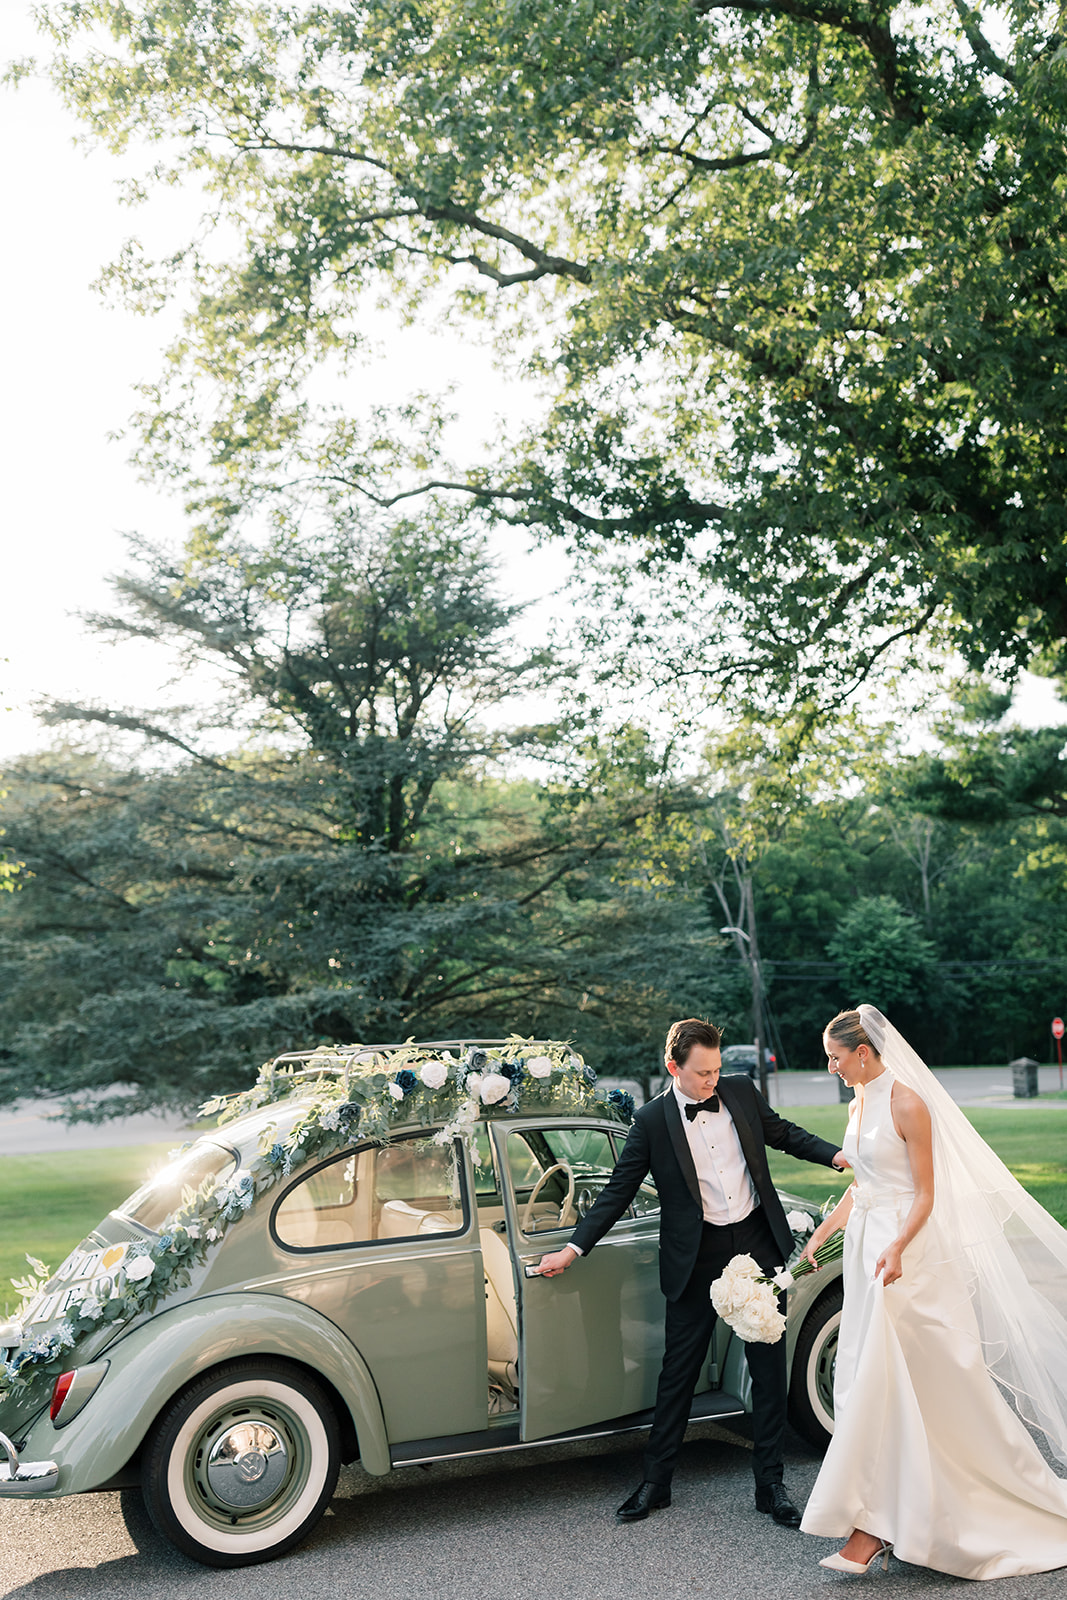 Married couple outside of church for couple's portraits with vintage VW decorated with "just married" sign